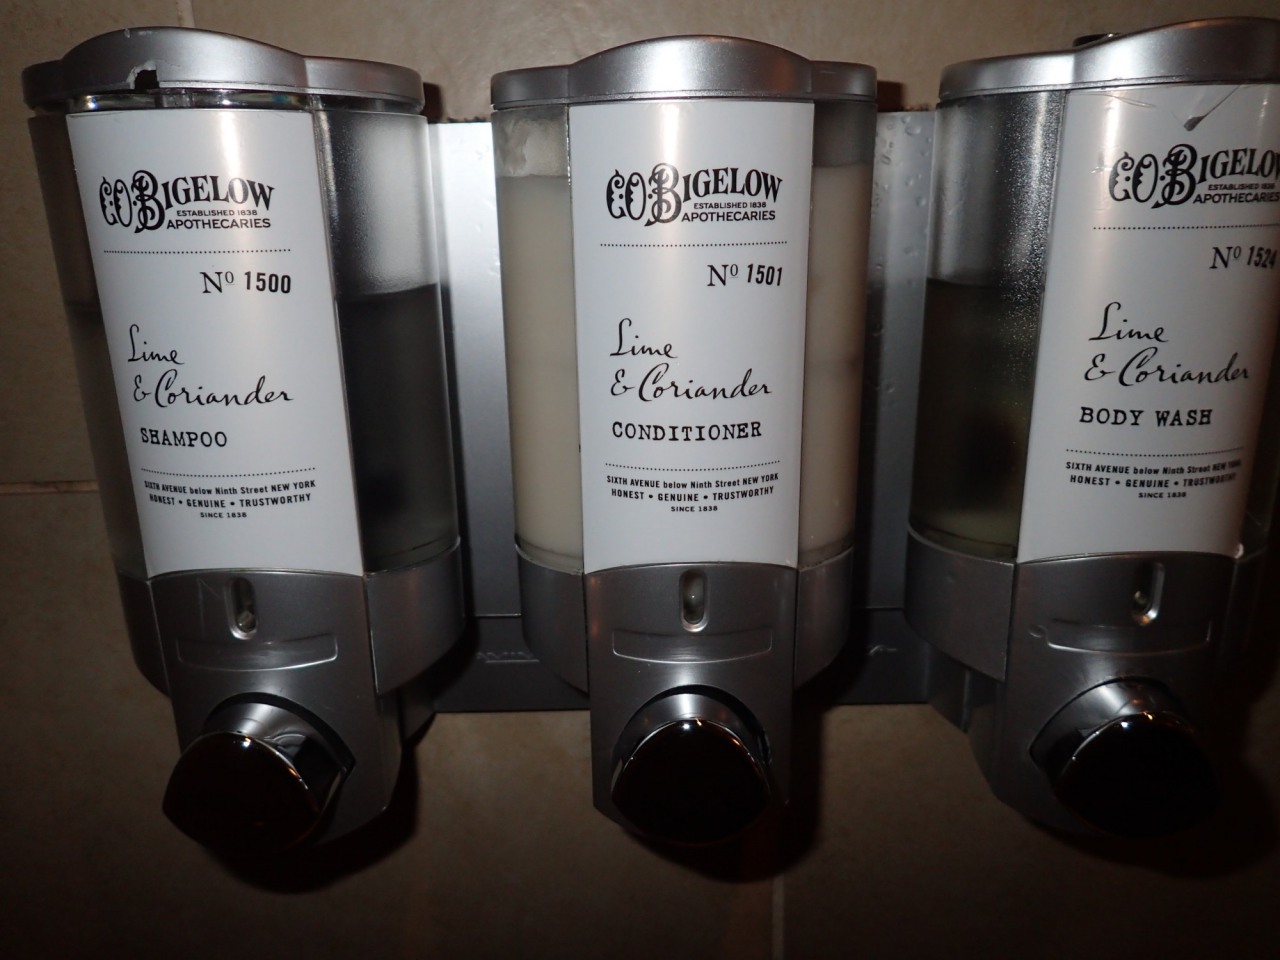 CO Bigelow bath products, American Admirals Club SFO Lounge Review